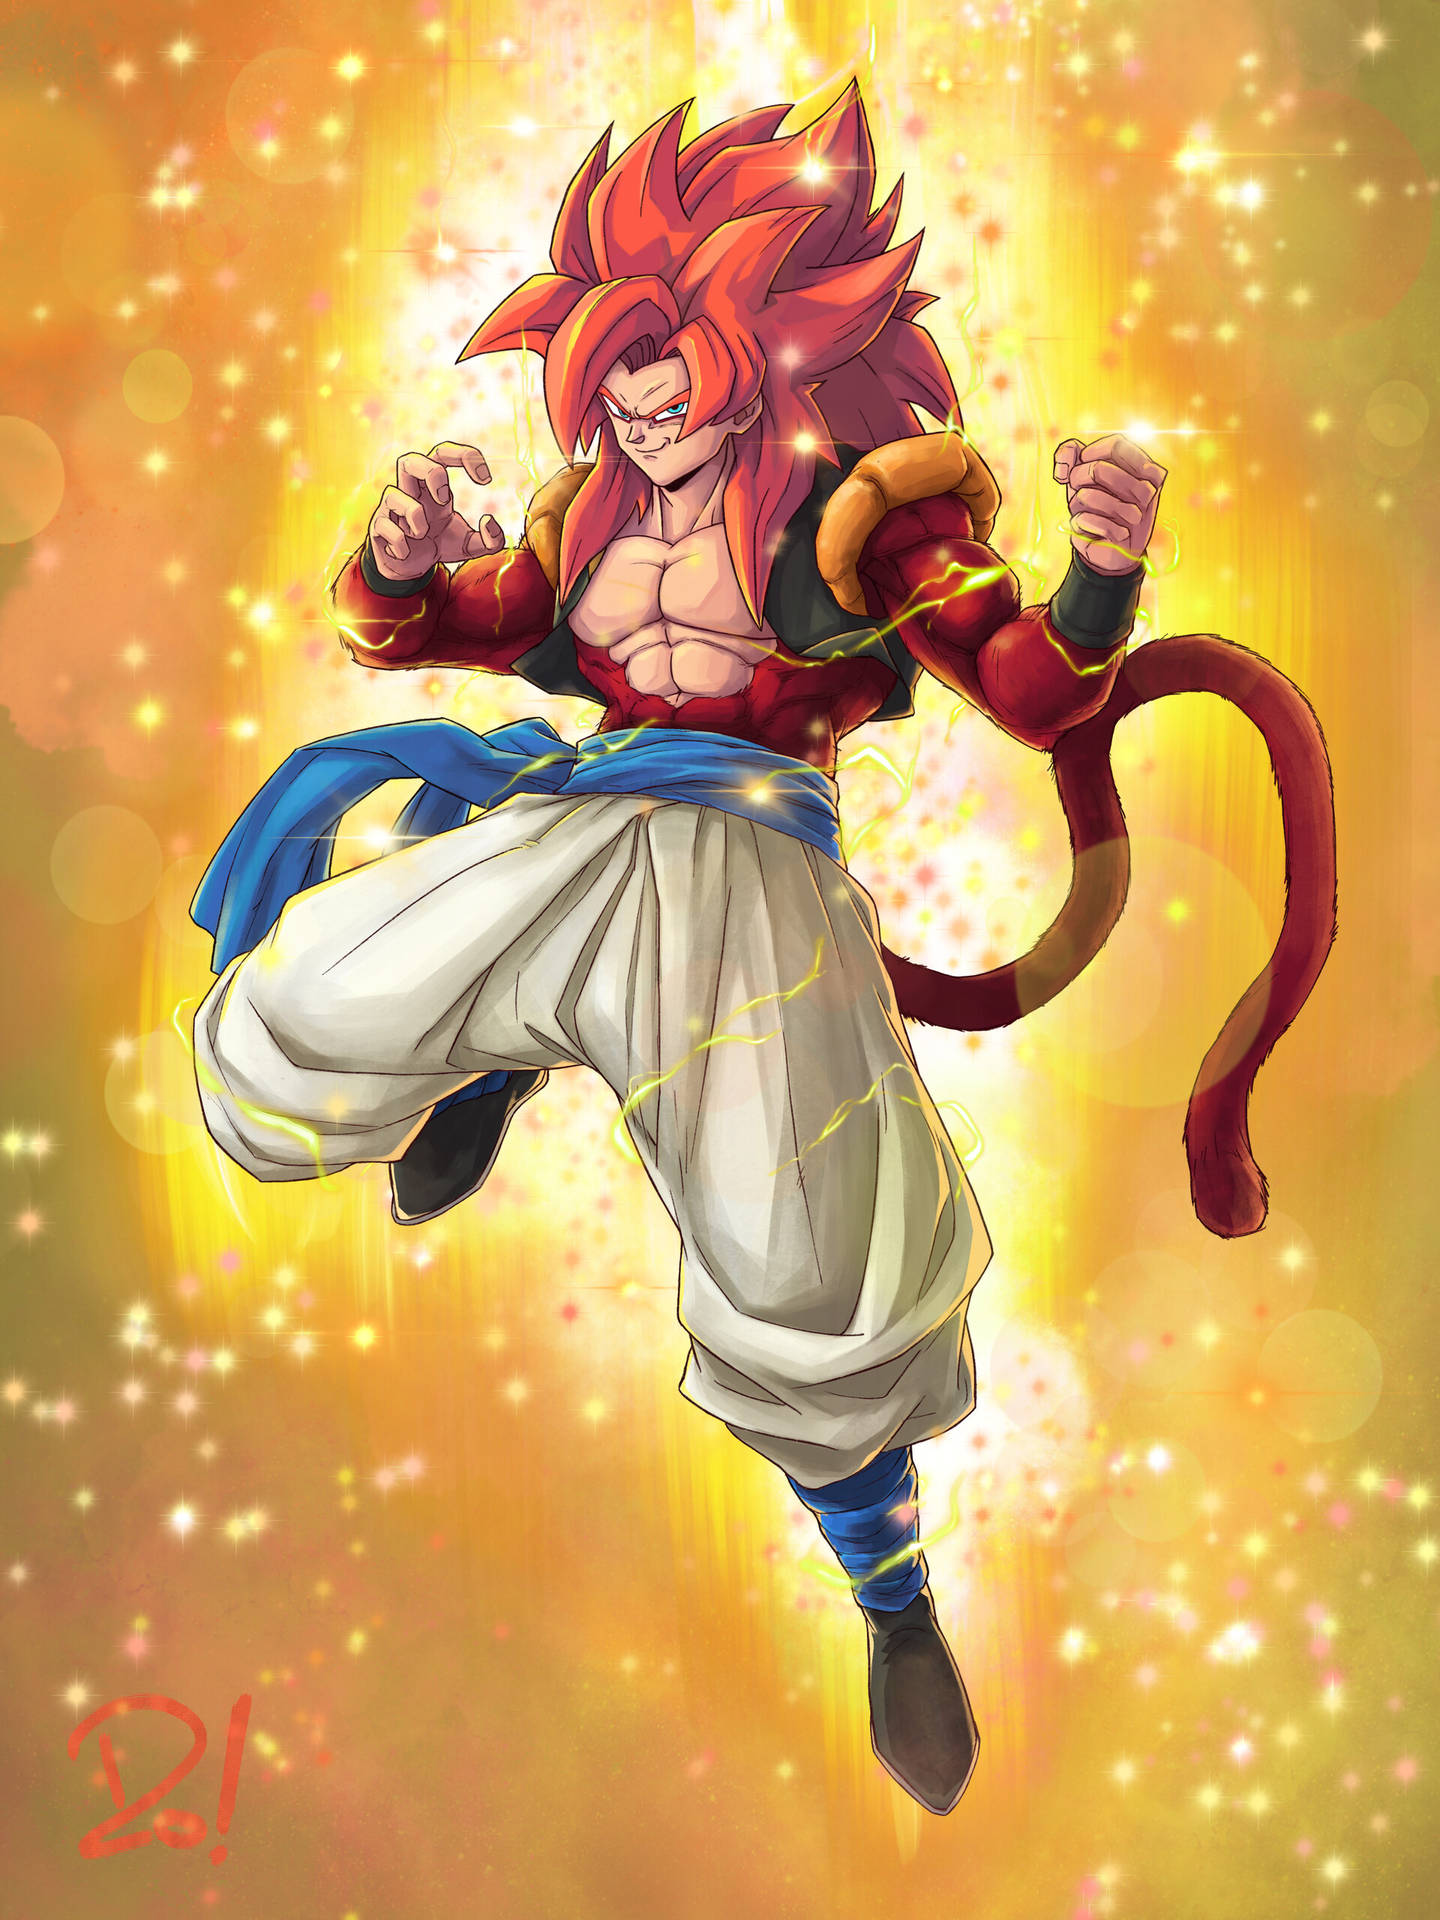 The Unstoppable Force - Gogeta In Action